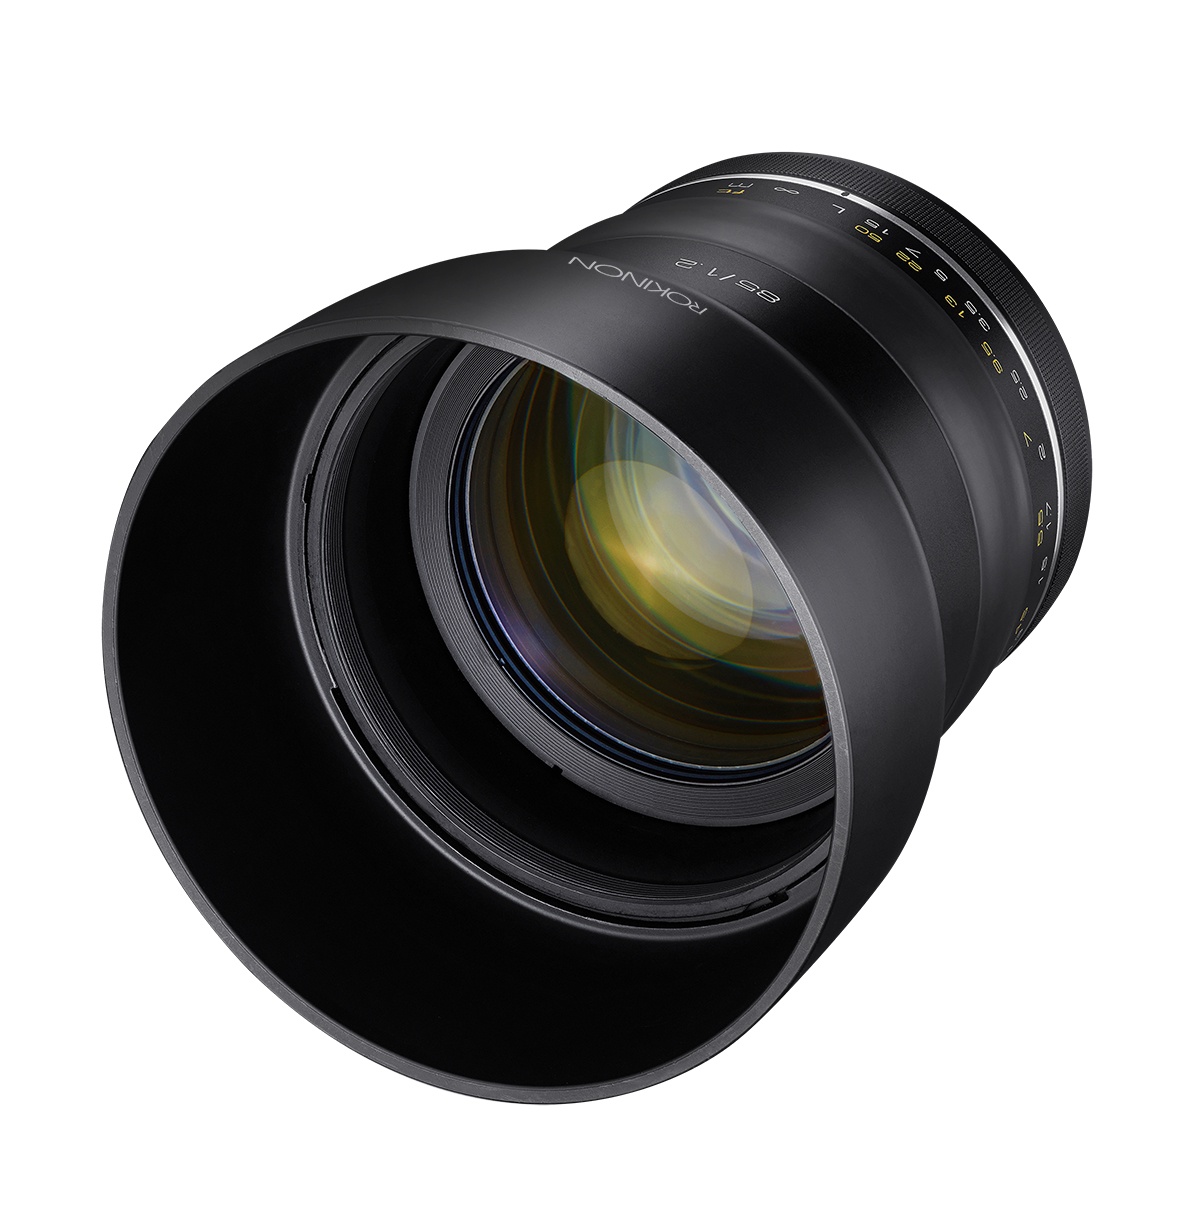 The Rokinon 85mm f1.2 and 14mm f2.4 Are Designed for High Res Sensors